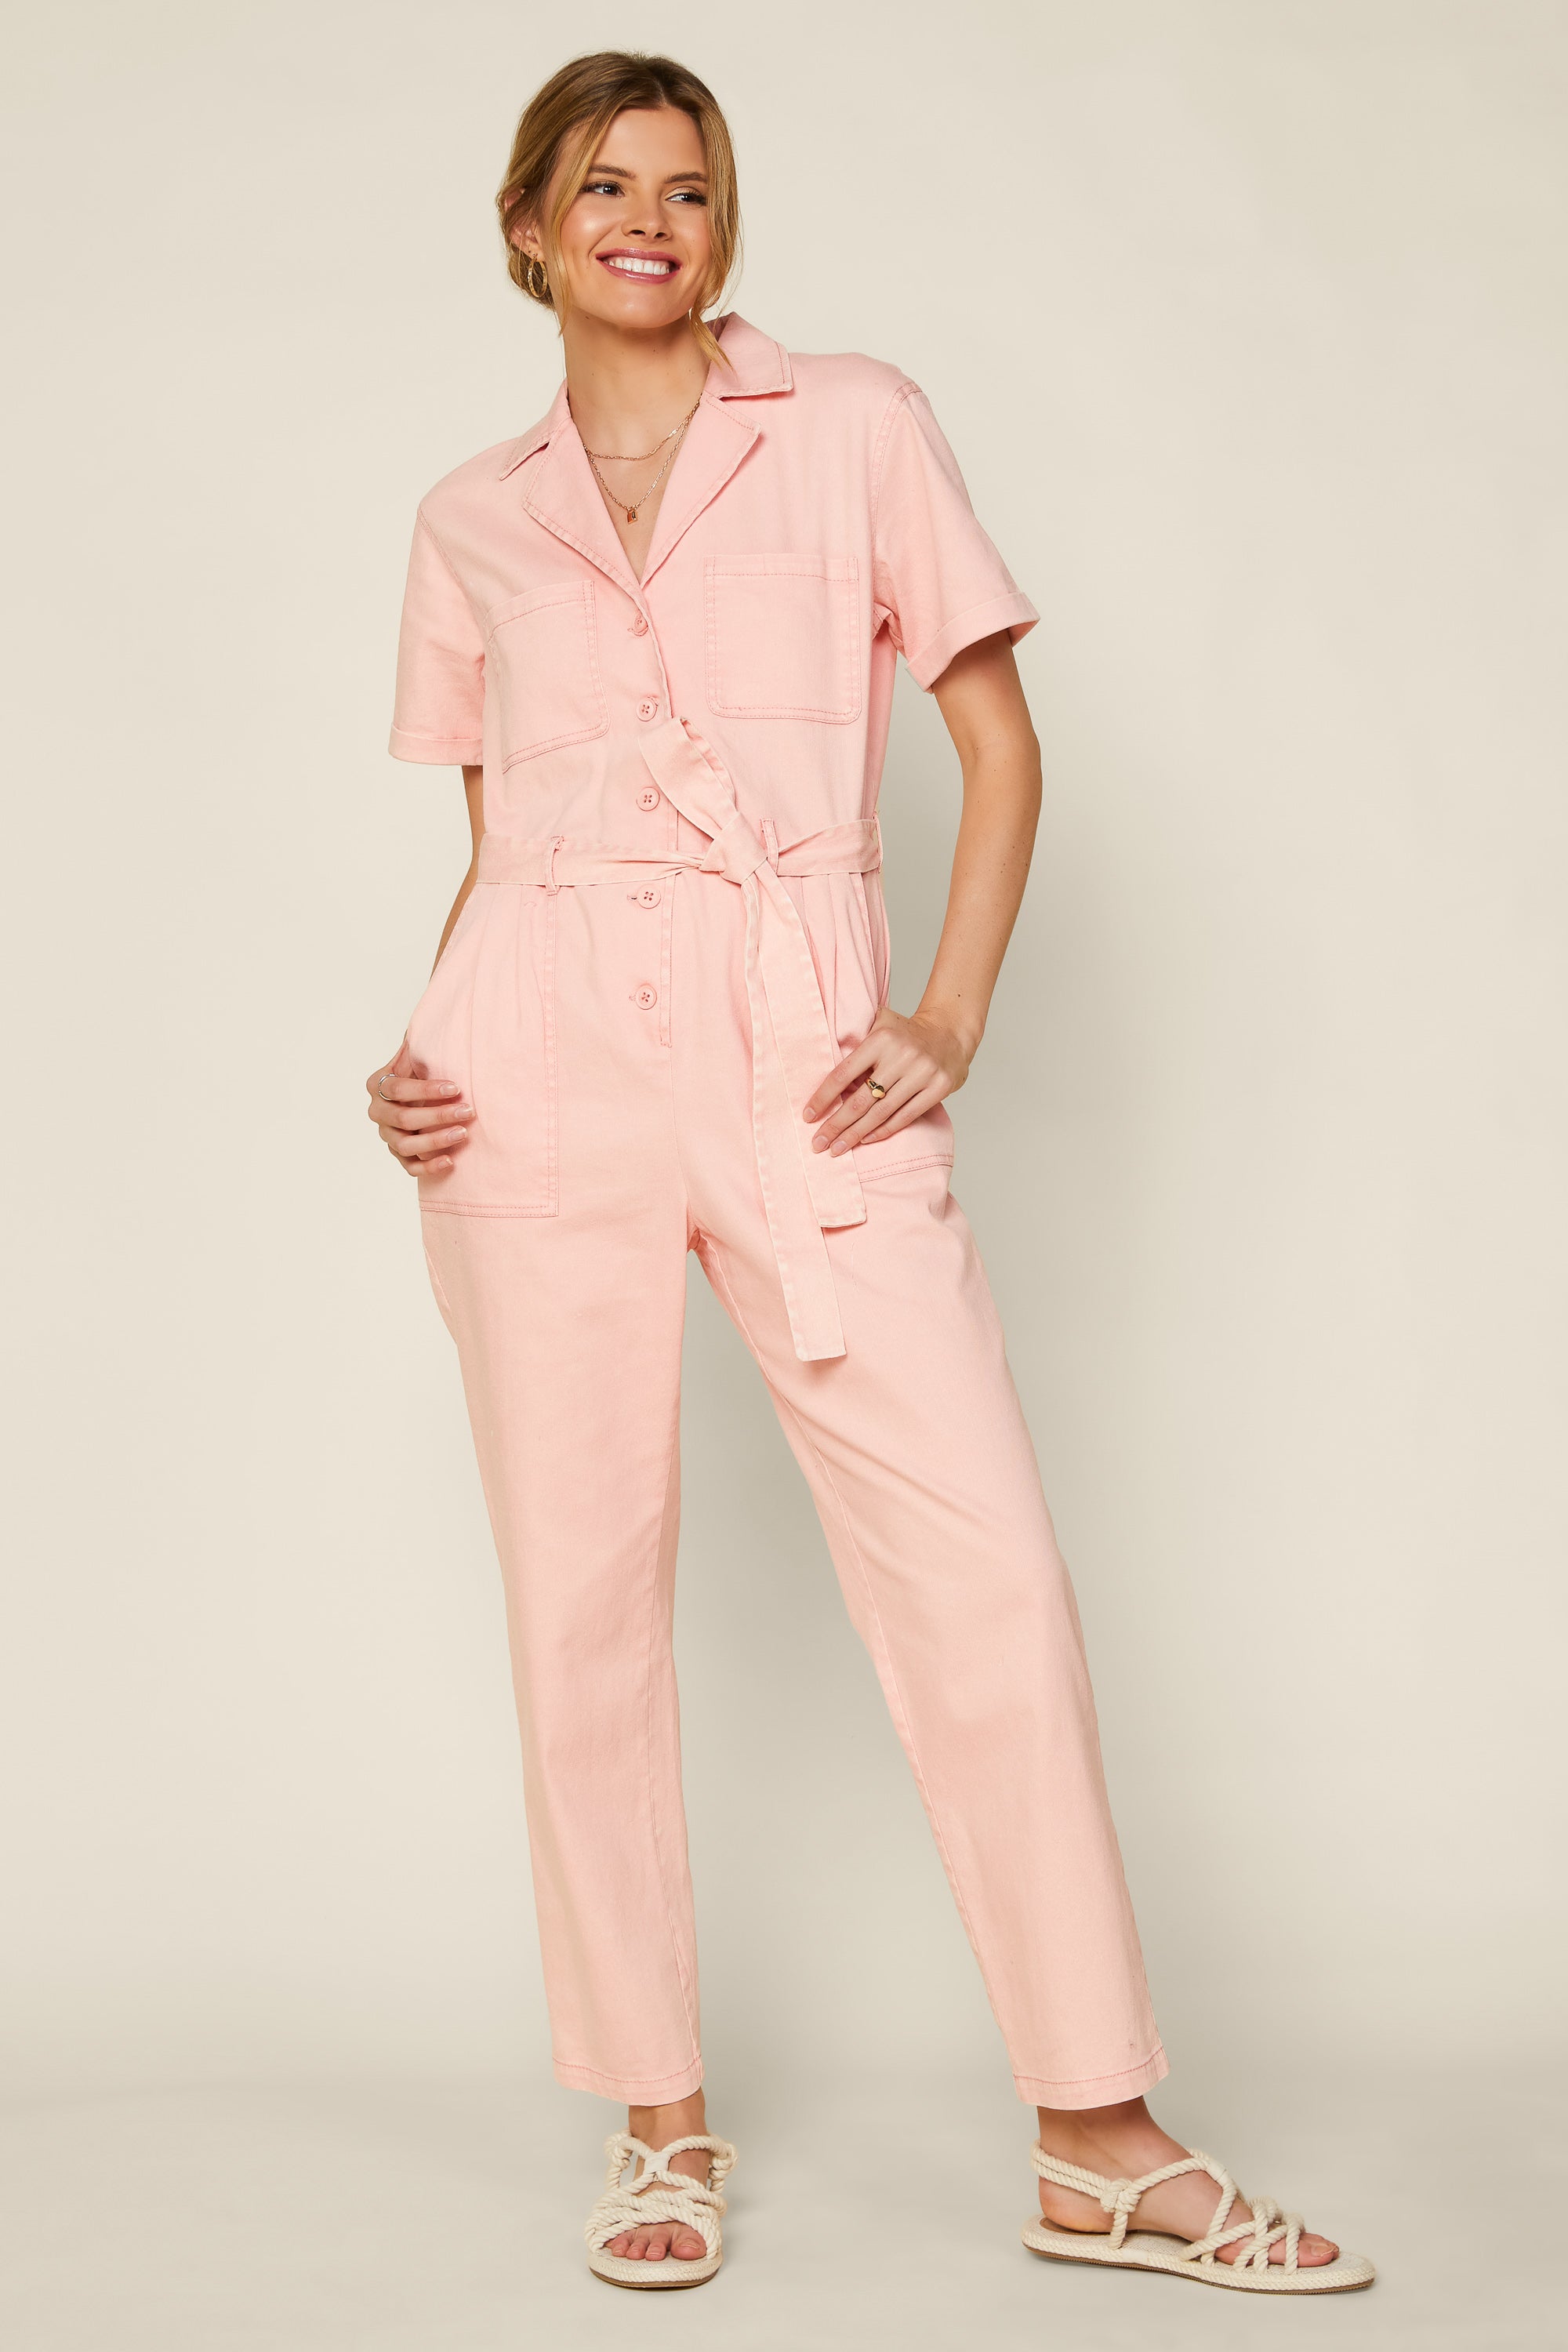 Smart Casual Embellished Jumpsuits For Girls – Cutecumber Designs